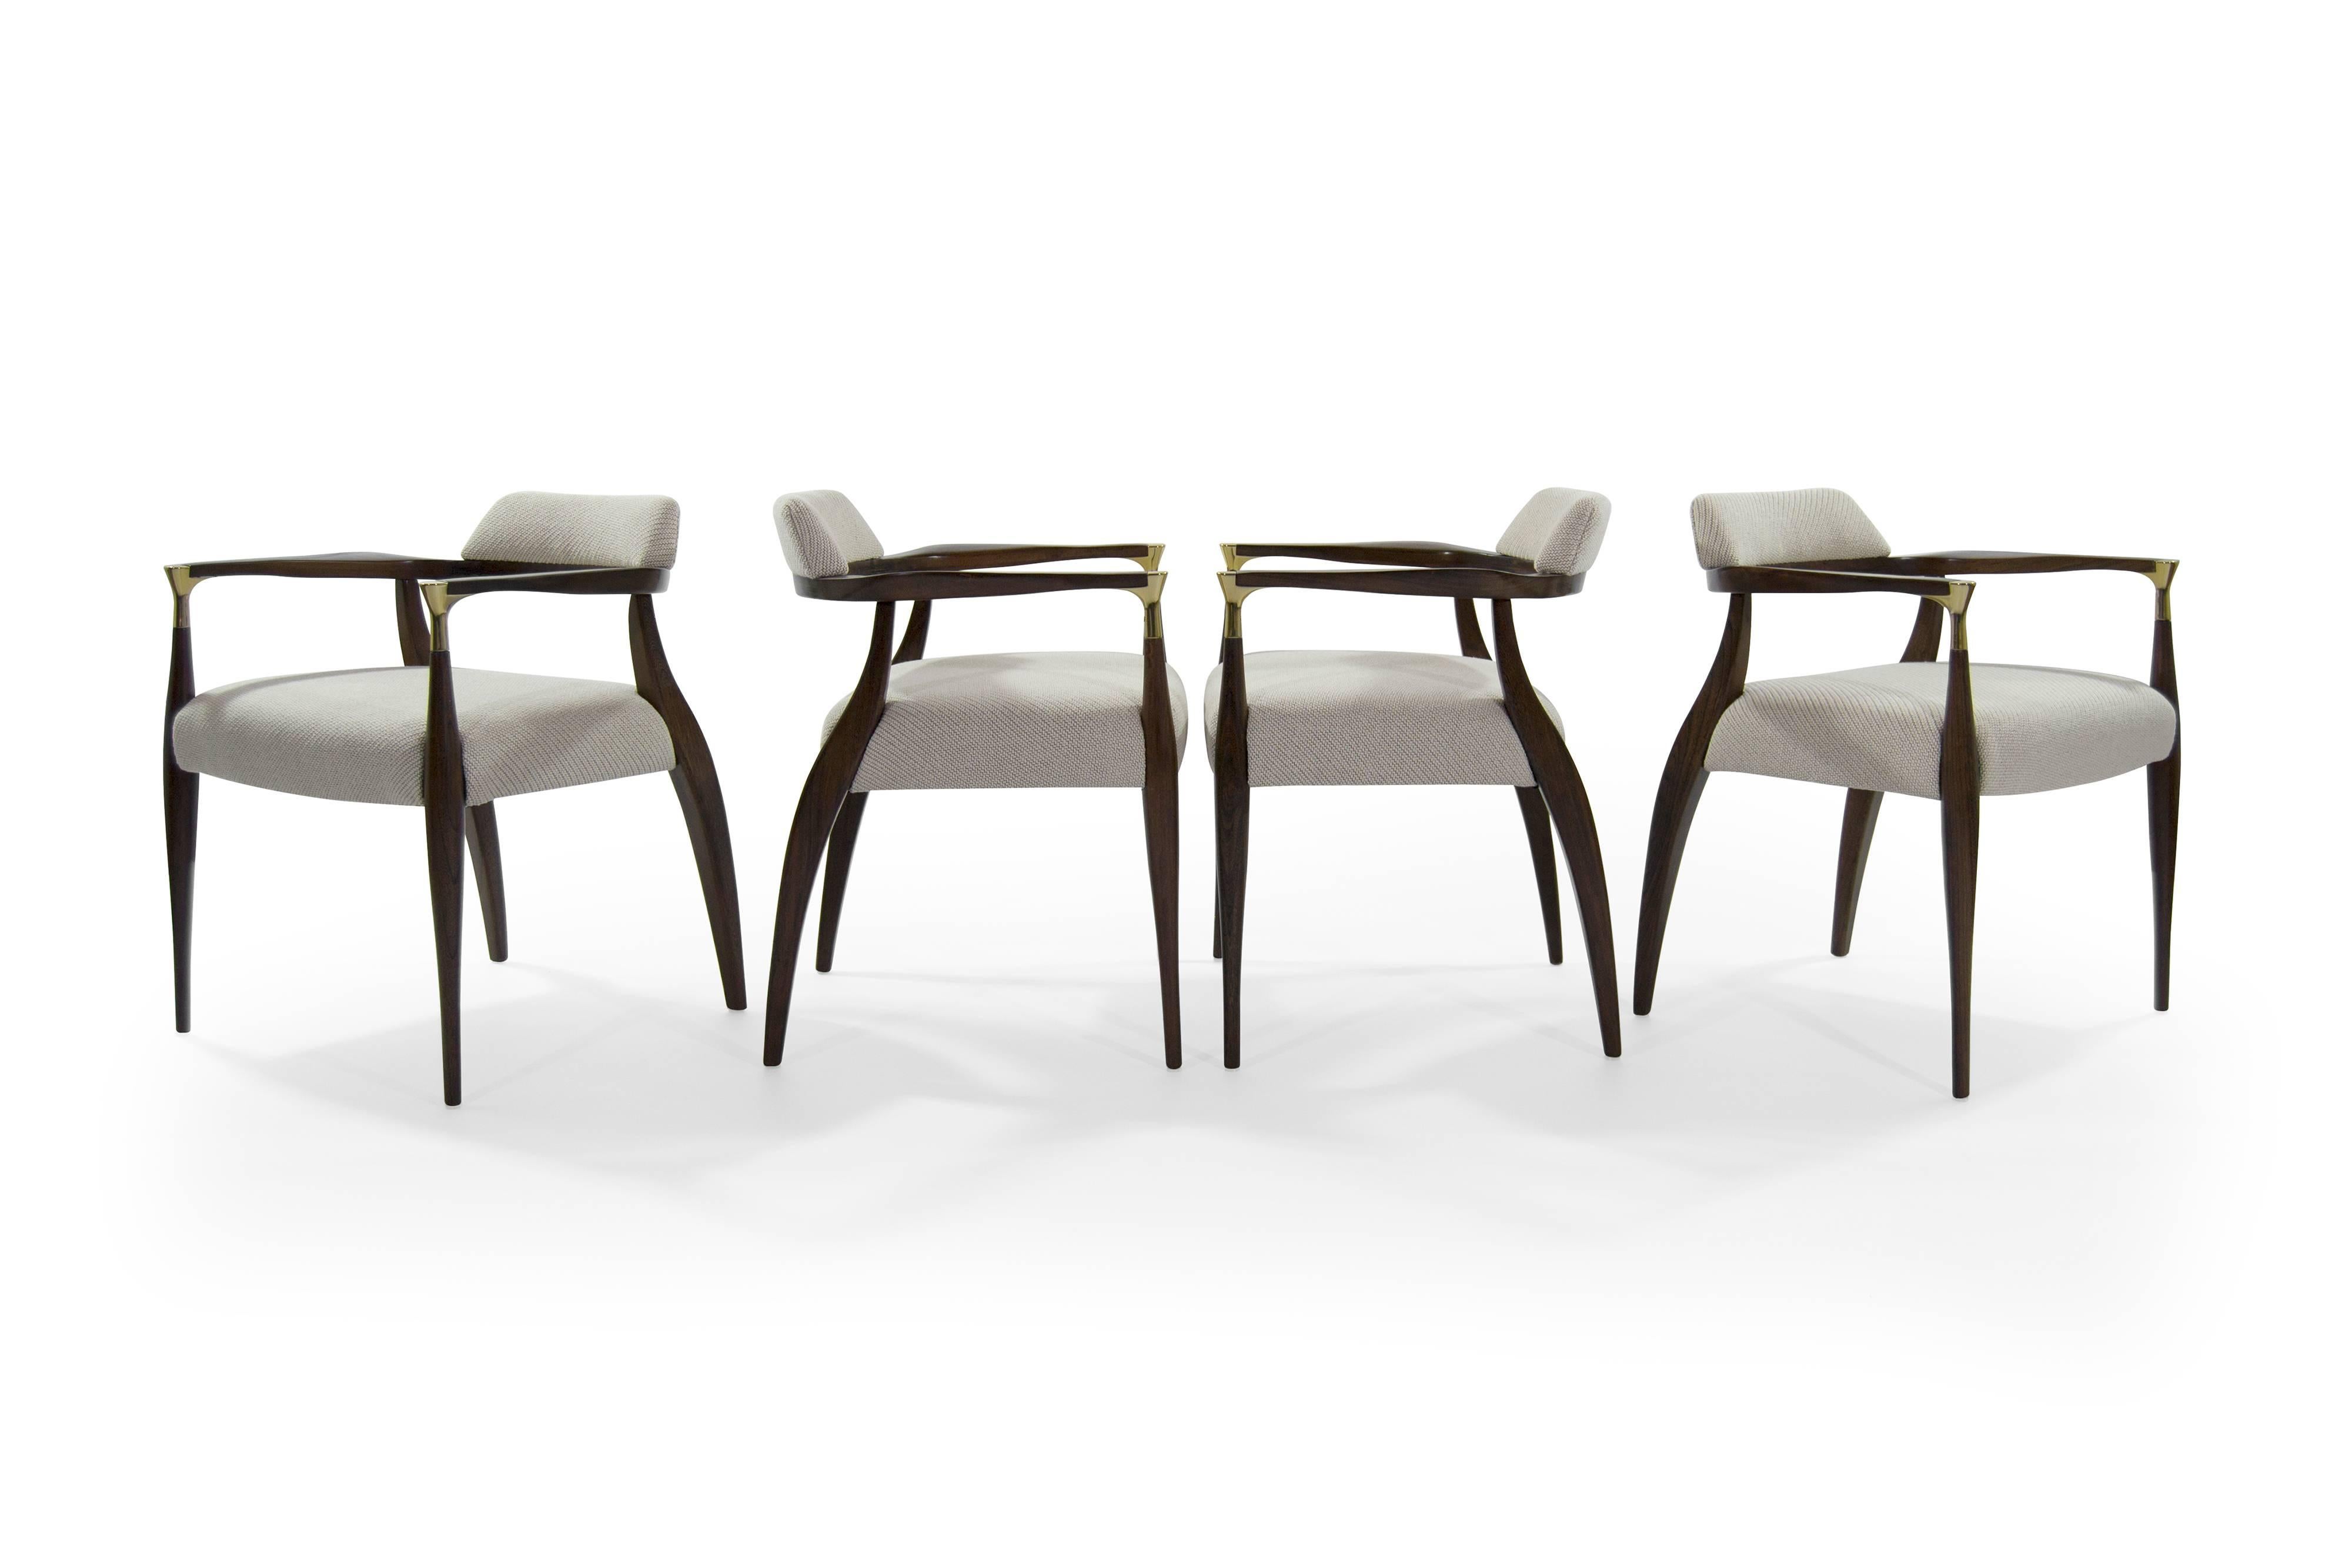 Four modern armchairs in the style of Ib Kofod-Larsen, circa 1950s.

This set features newly polished brass arm-tip details. Newly upholstered in an off-white coda wool by Maharam/Kvadrat. Sculptural walnut frames fully restored.